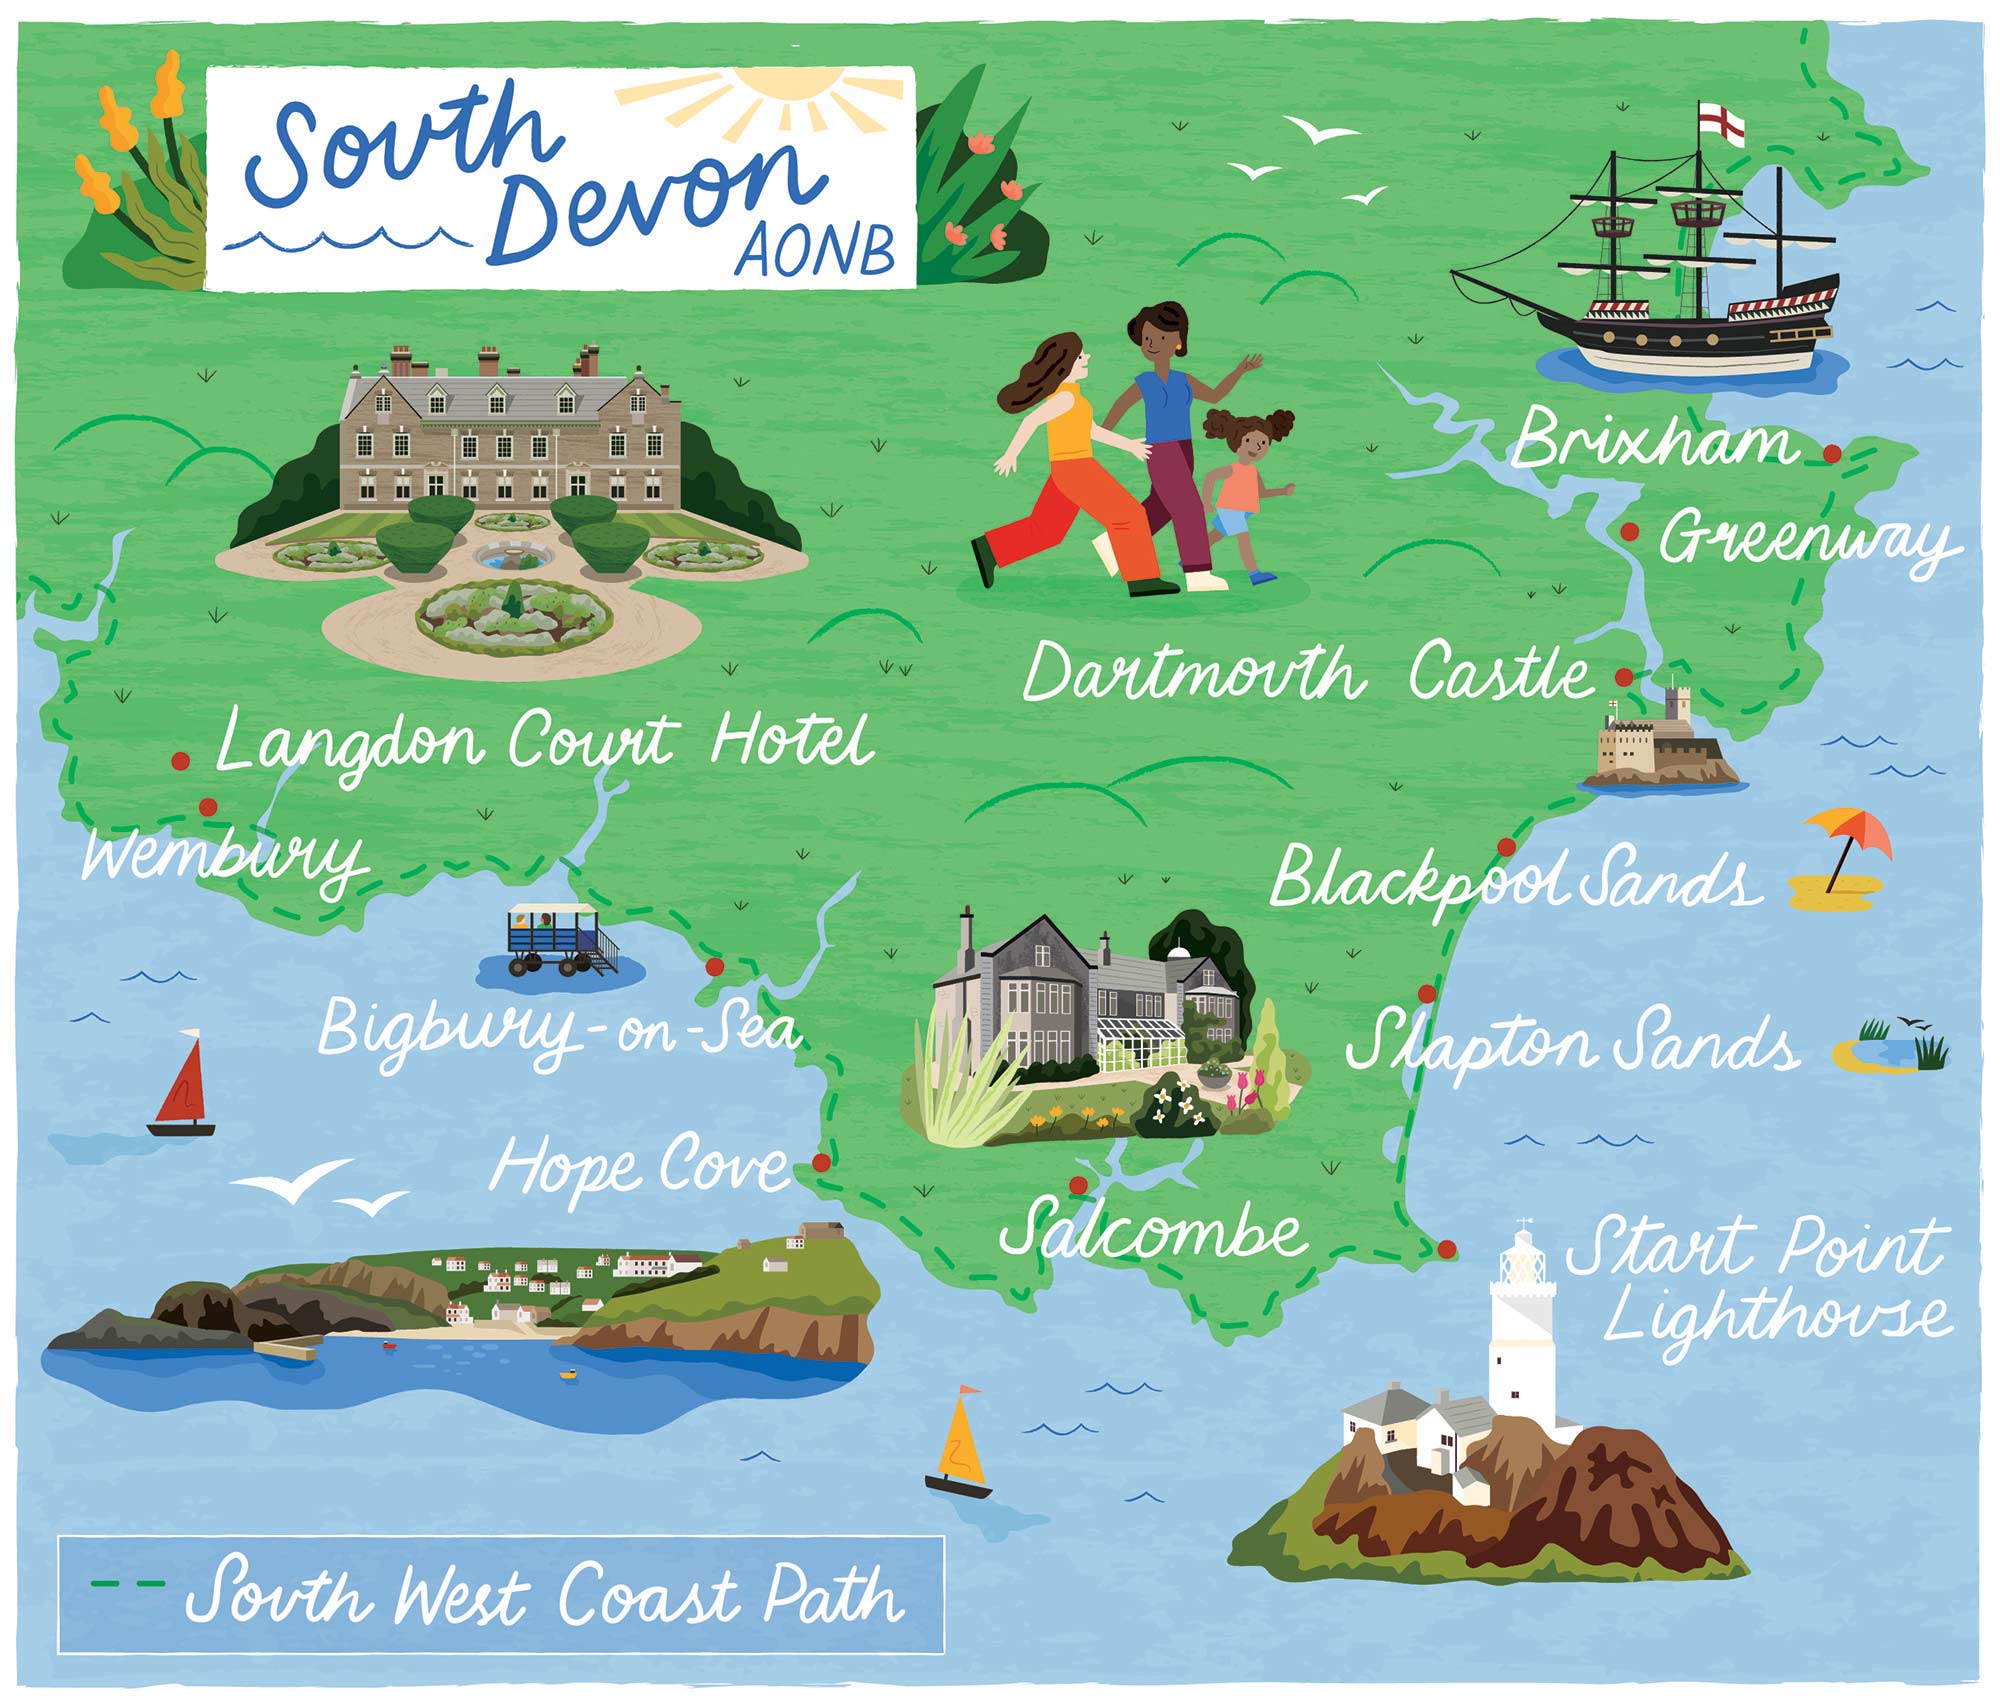 A map of South Devon for Discover Britain magazine by Elly Jahnz